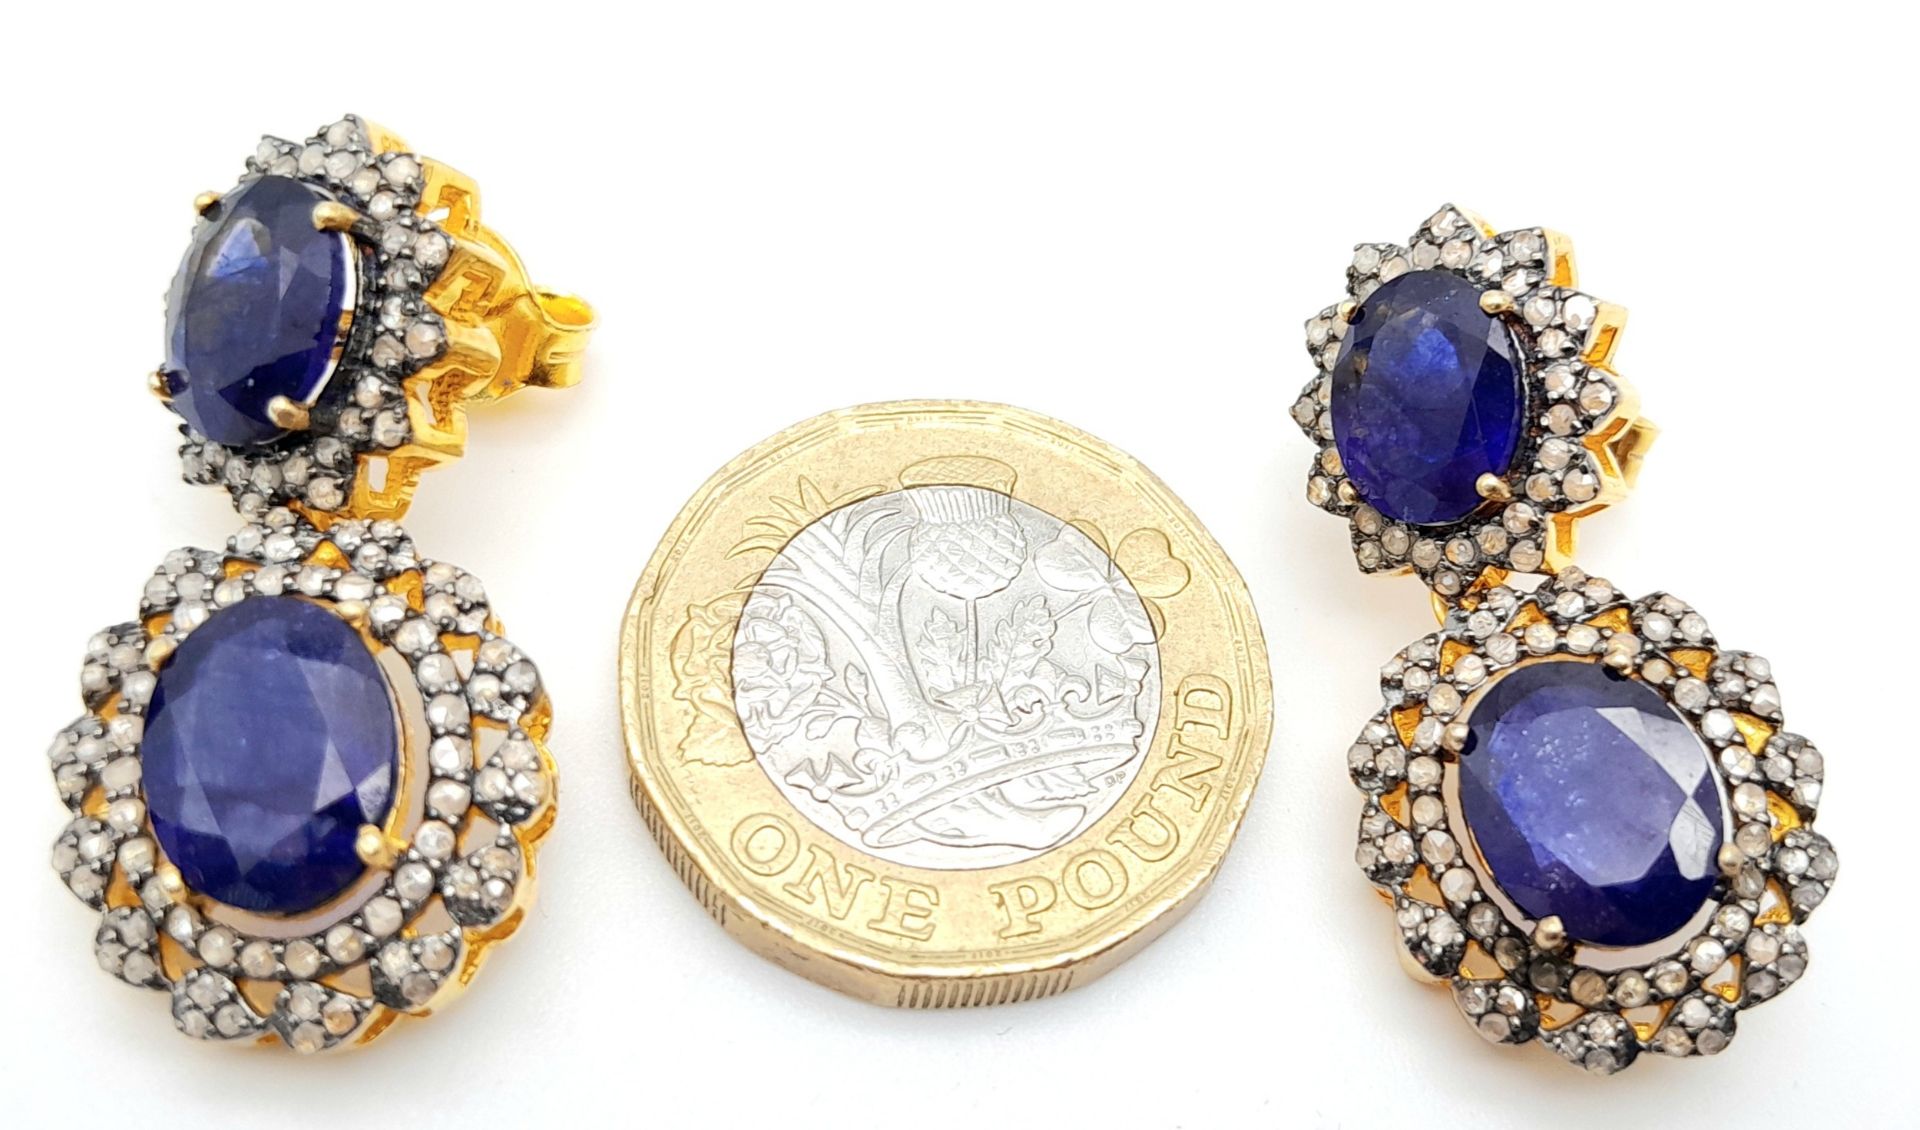 A Pair of Blue Sapphire Gemstone Drop Earrings with Diamond Surrounds. Set in gilded 925 Silver. - Image 3 of 3